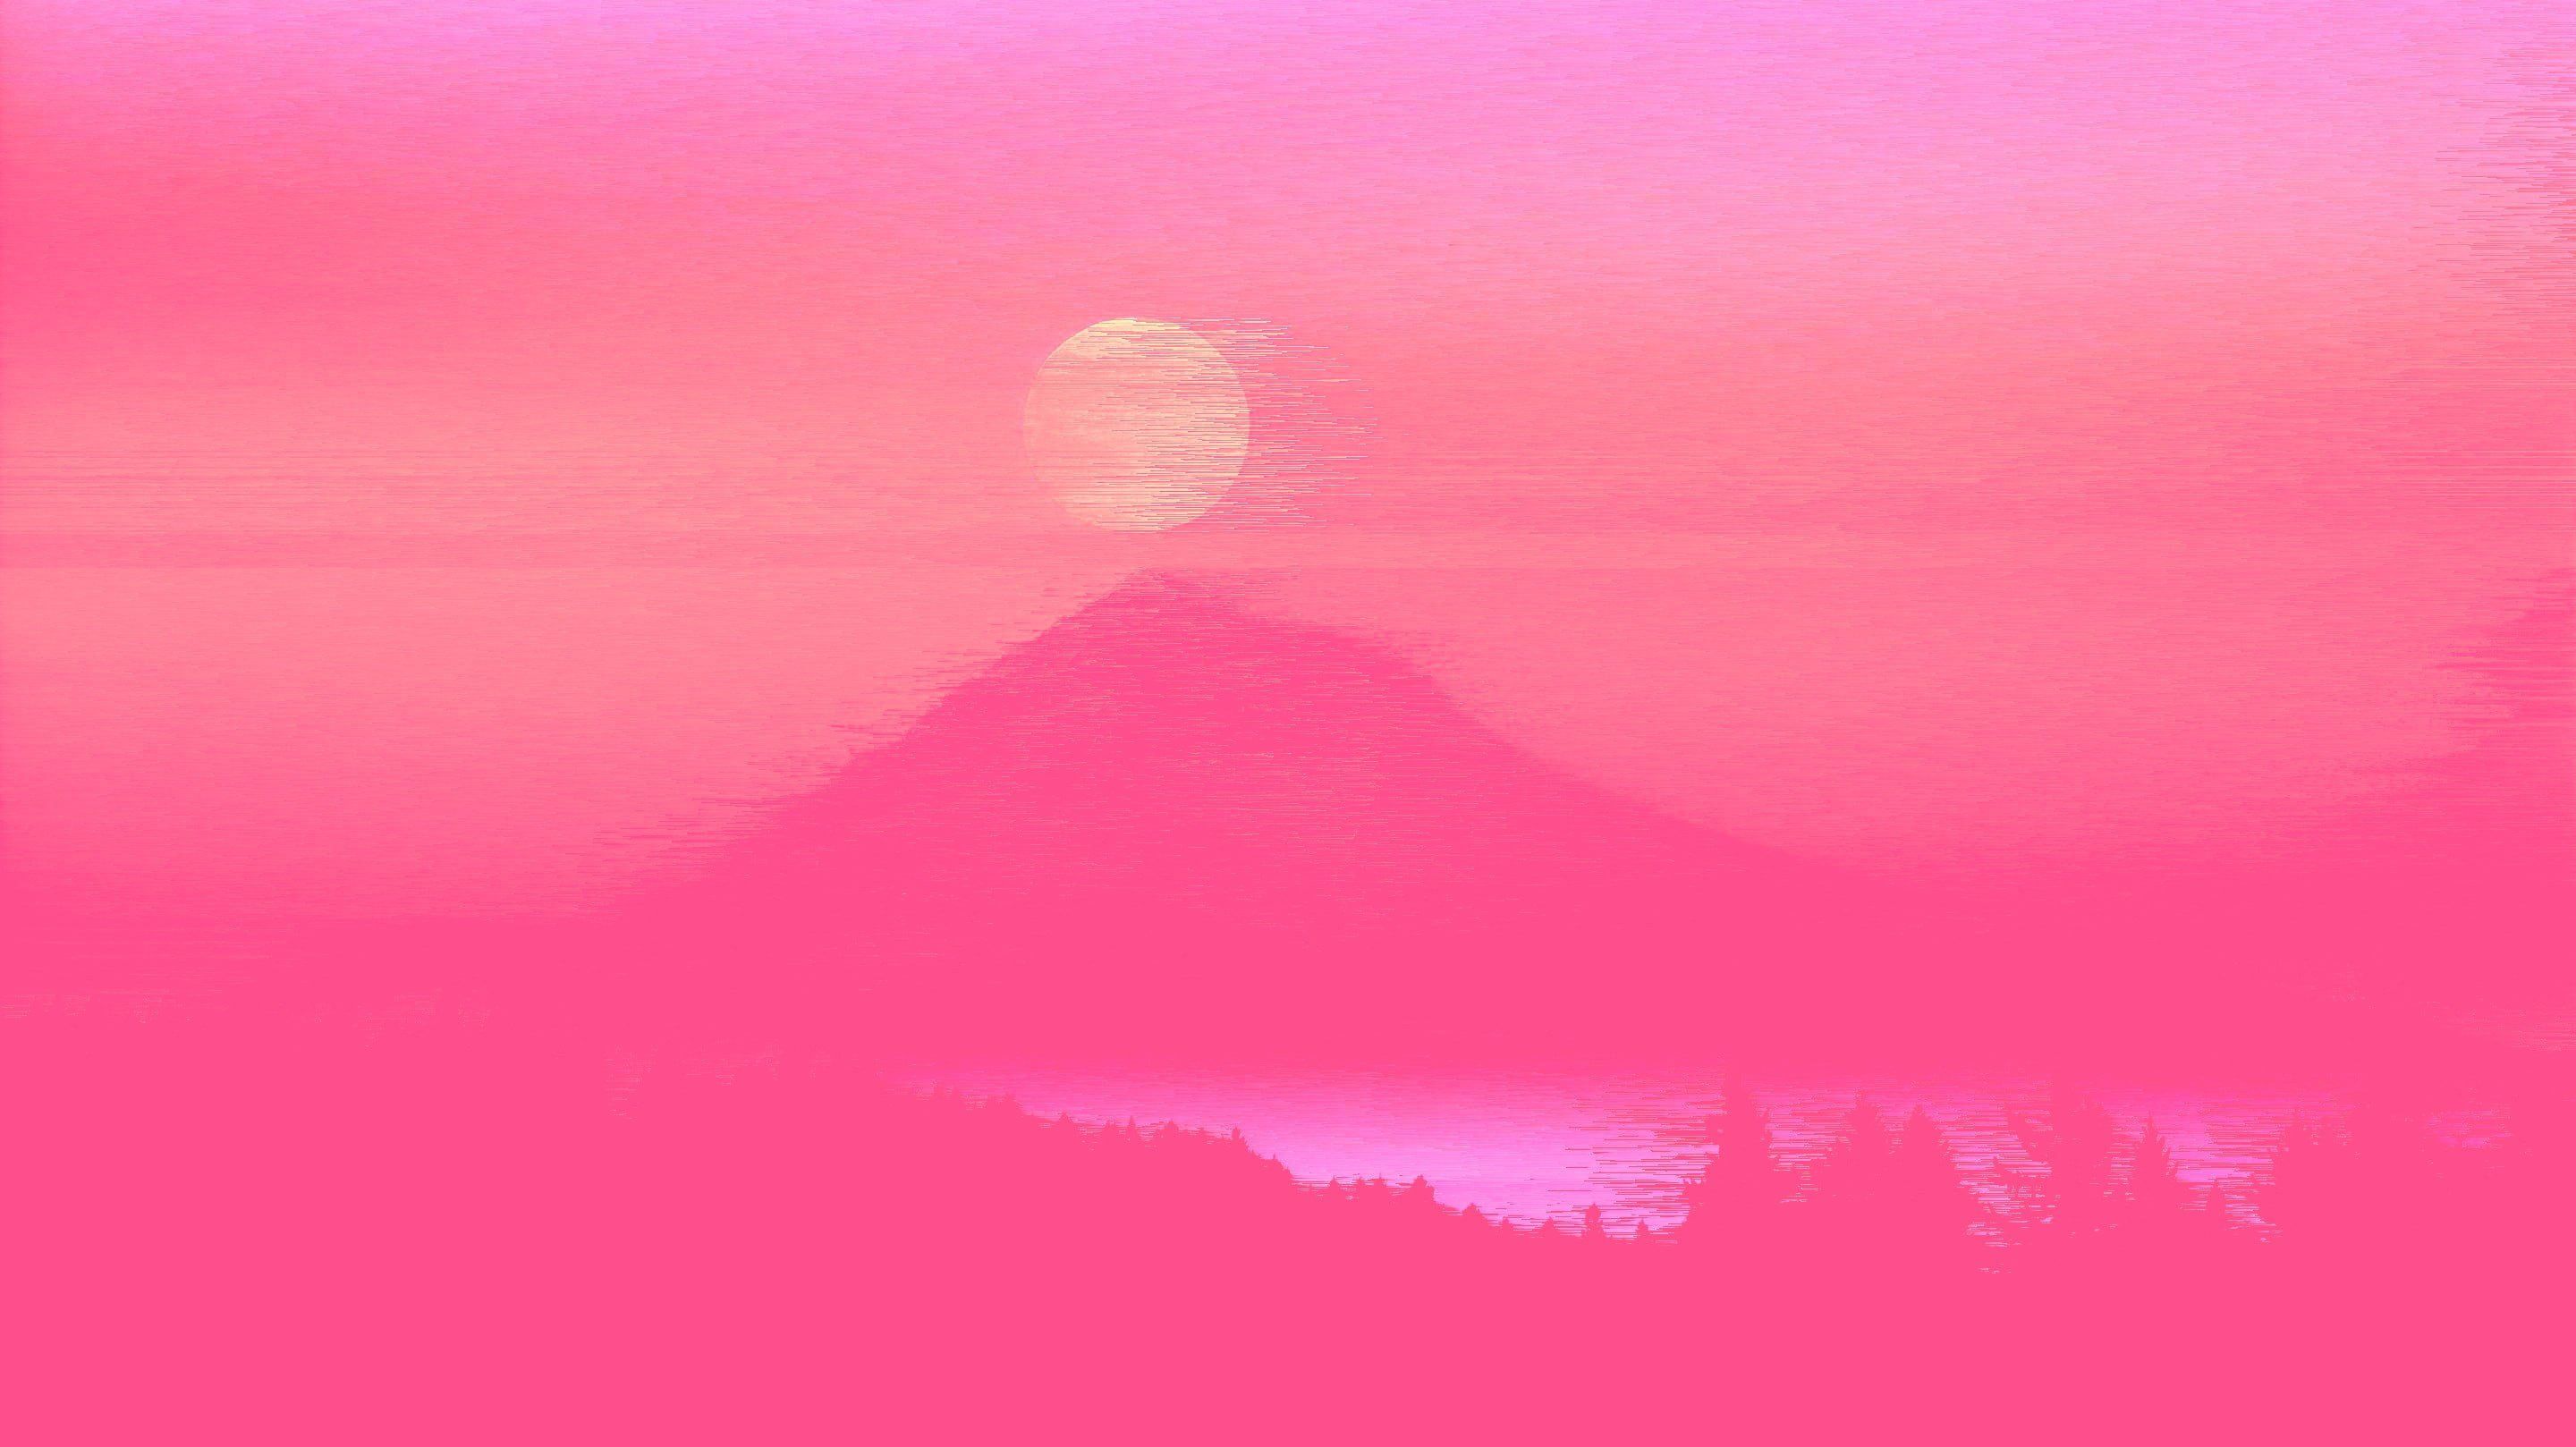 A pink sunset over a mountain - Neon pink, neon